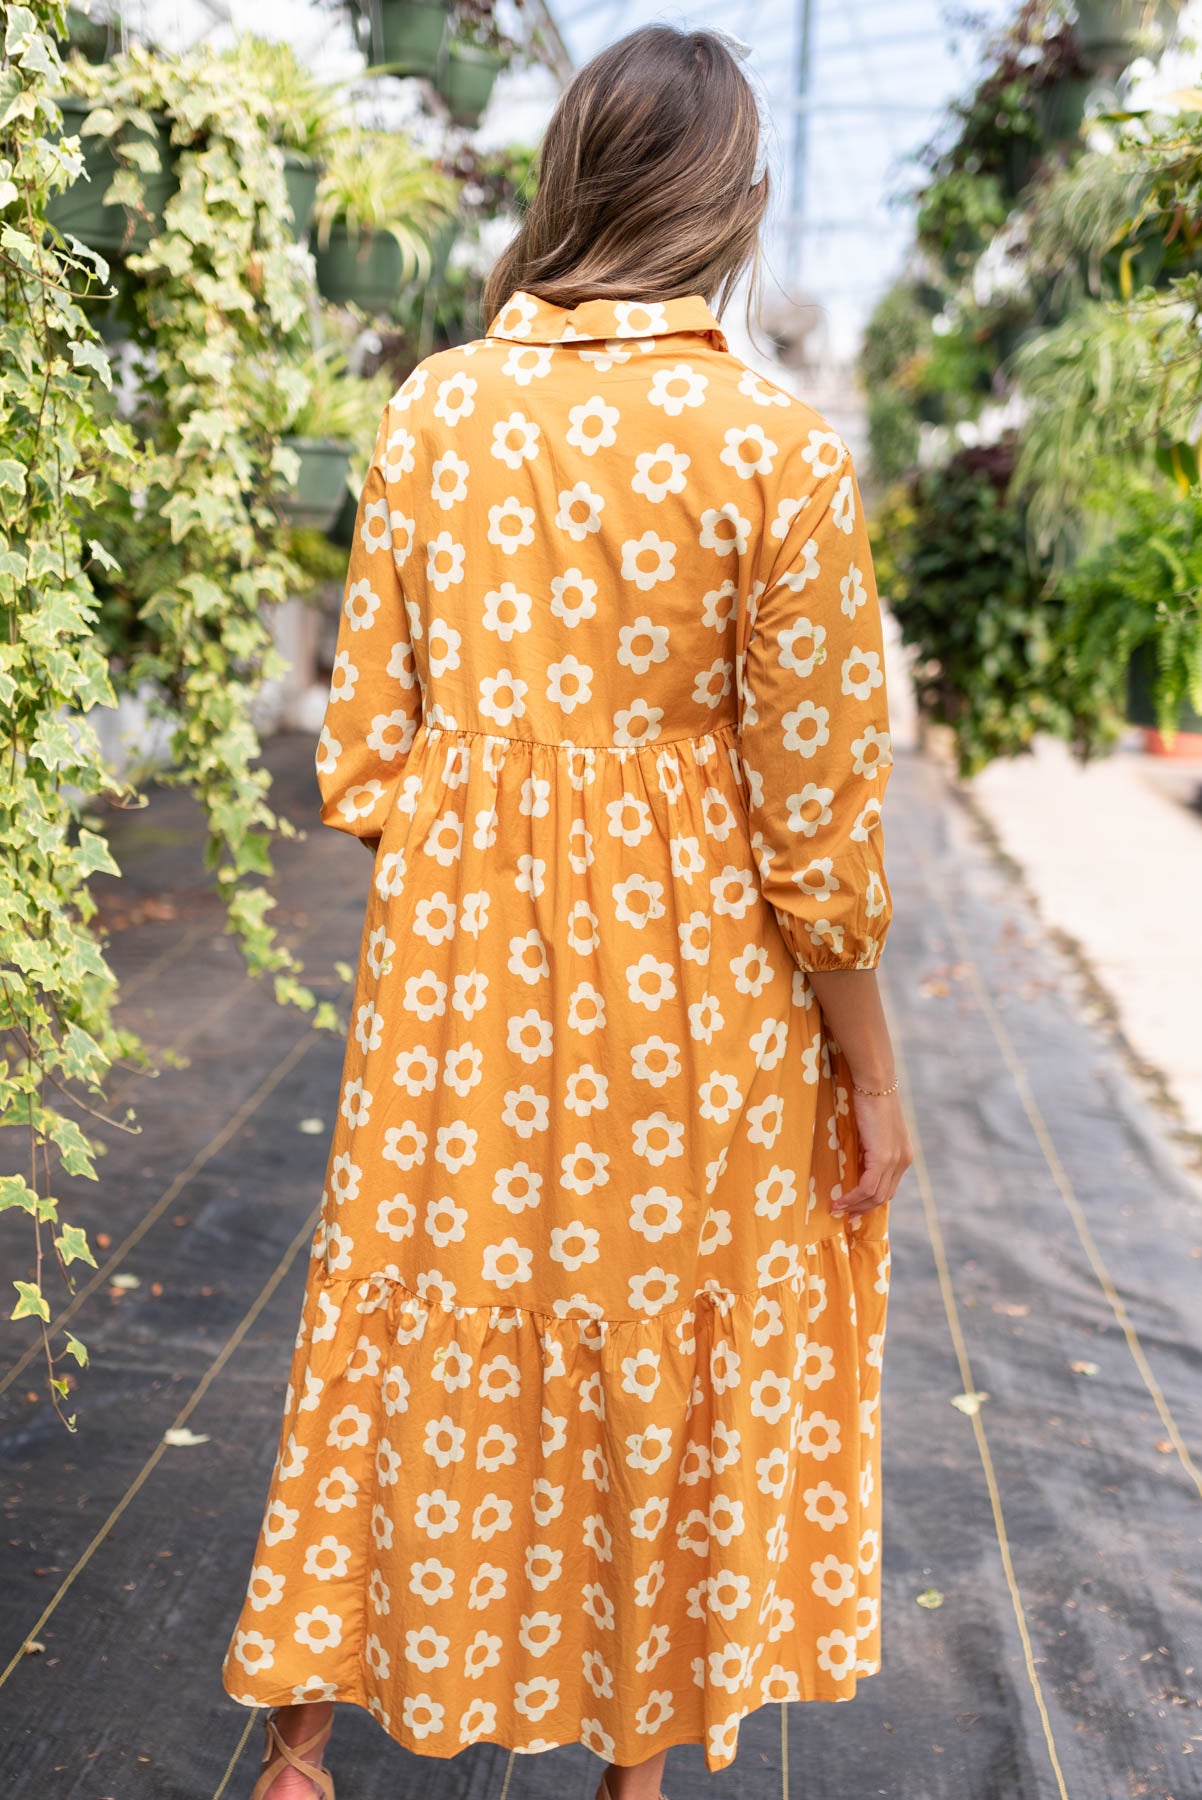 Back view of the golden floral dress